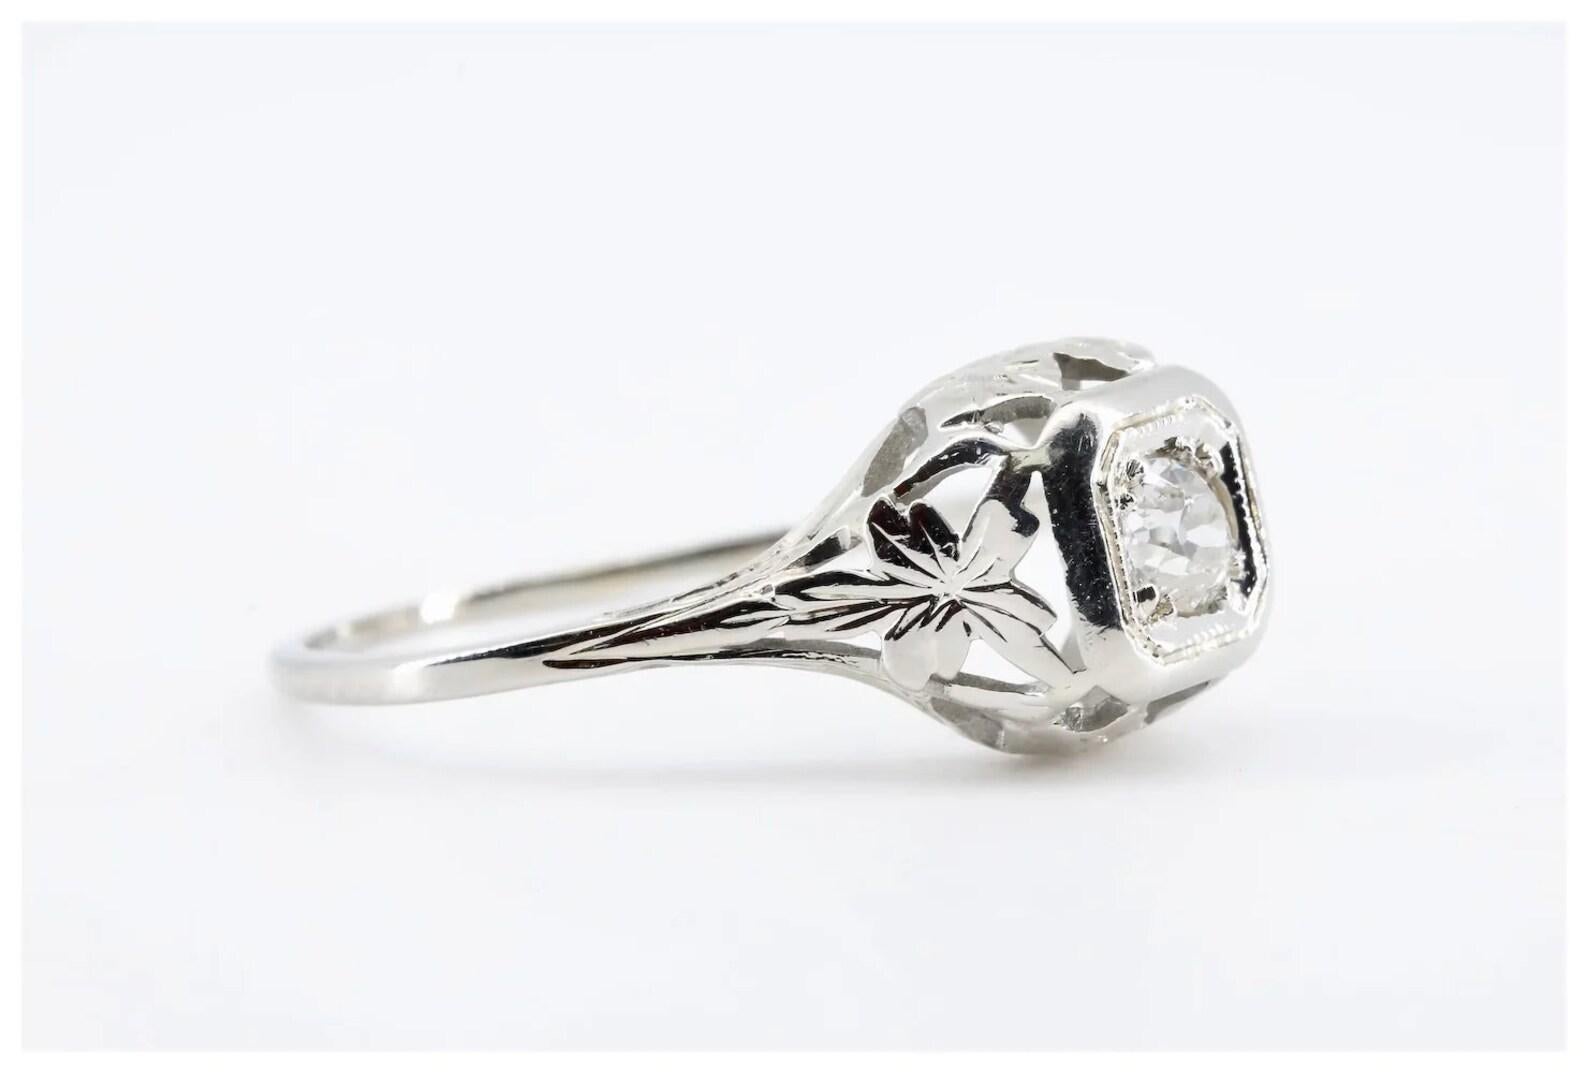 A Art Deco period die struck diamond engagement ring. Crafted in 18 karat white gold and centered by a 0.20 carat Old European cut diamond. Grading as H color VS2 clarity the diamond is embraced by hand engraved detailing and pierced filigree